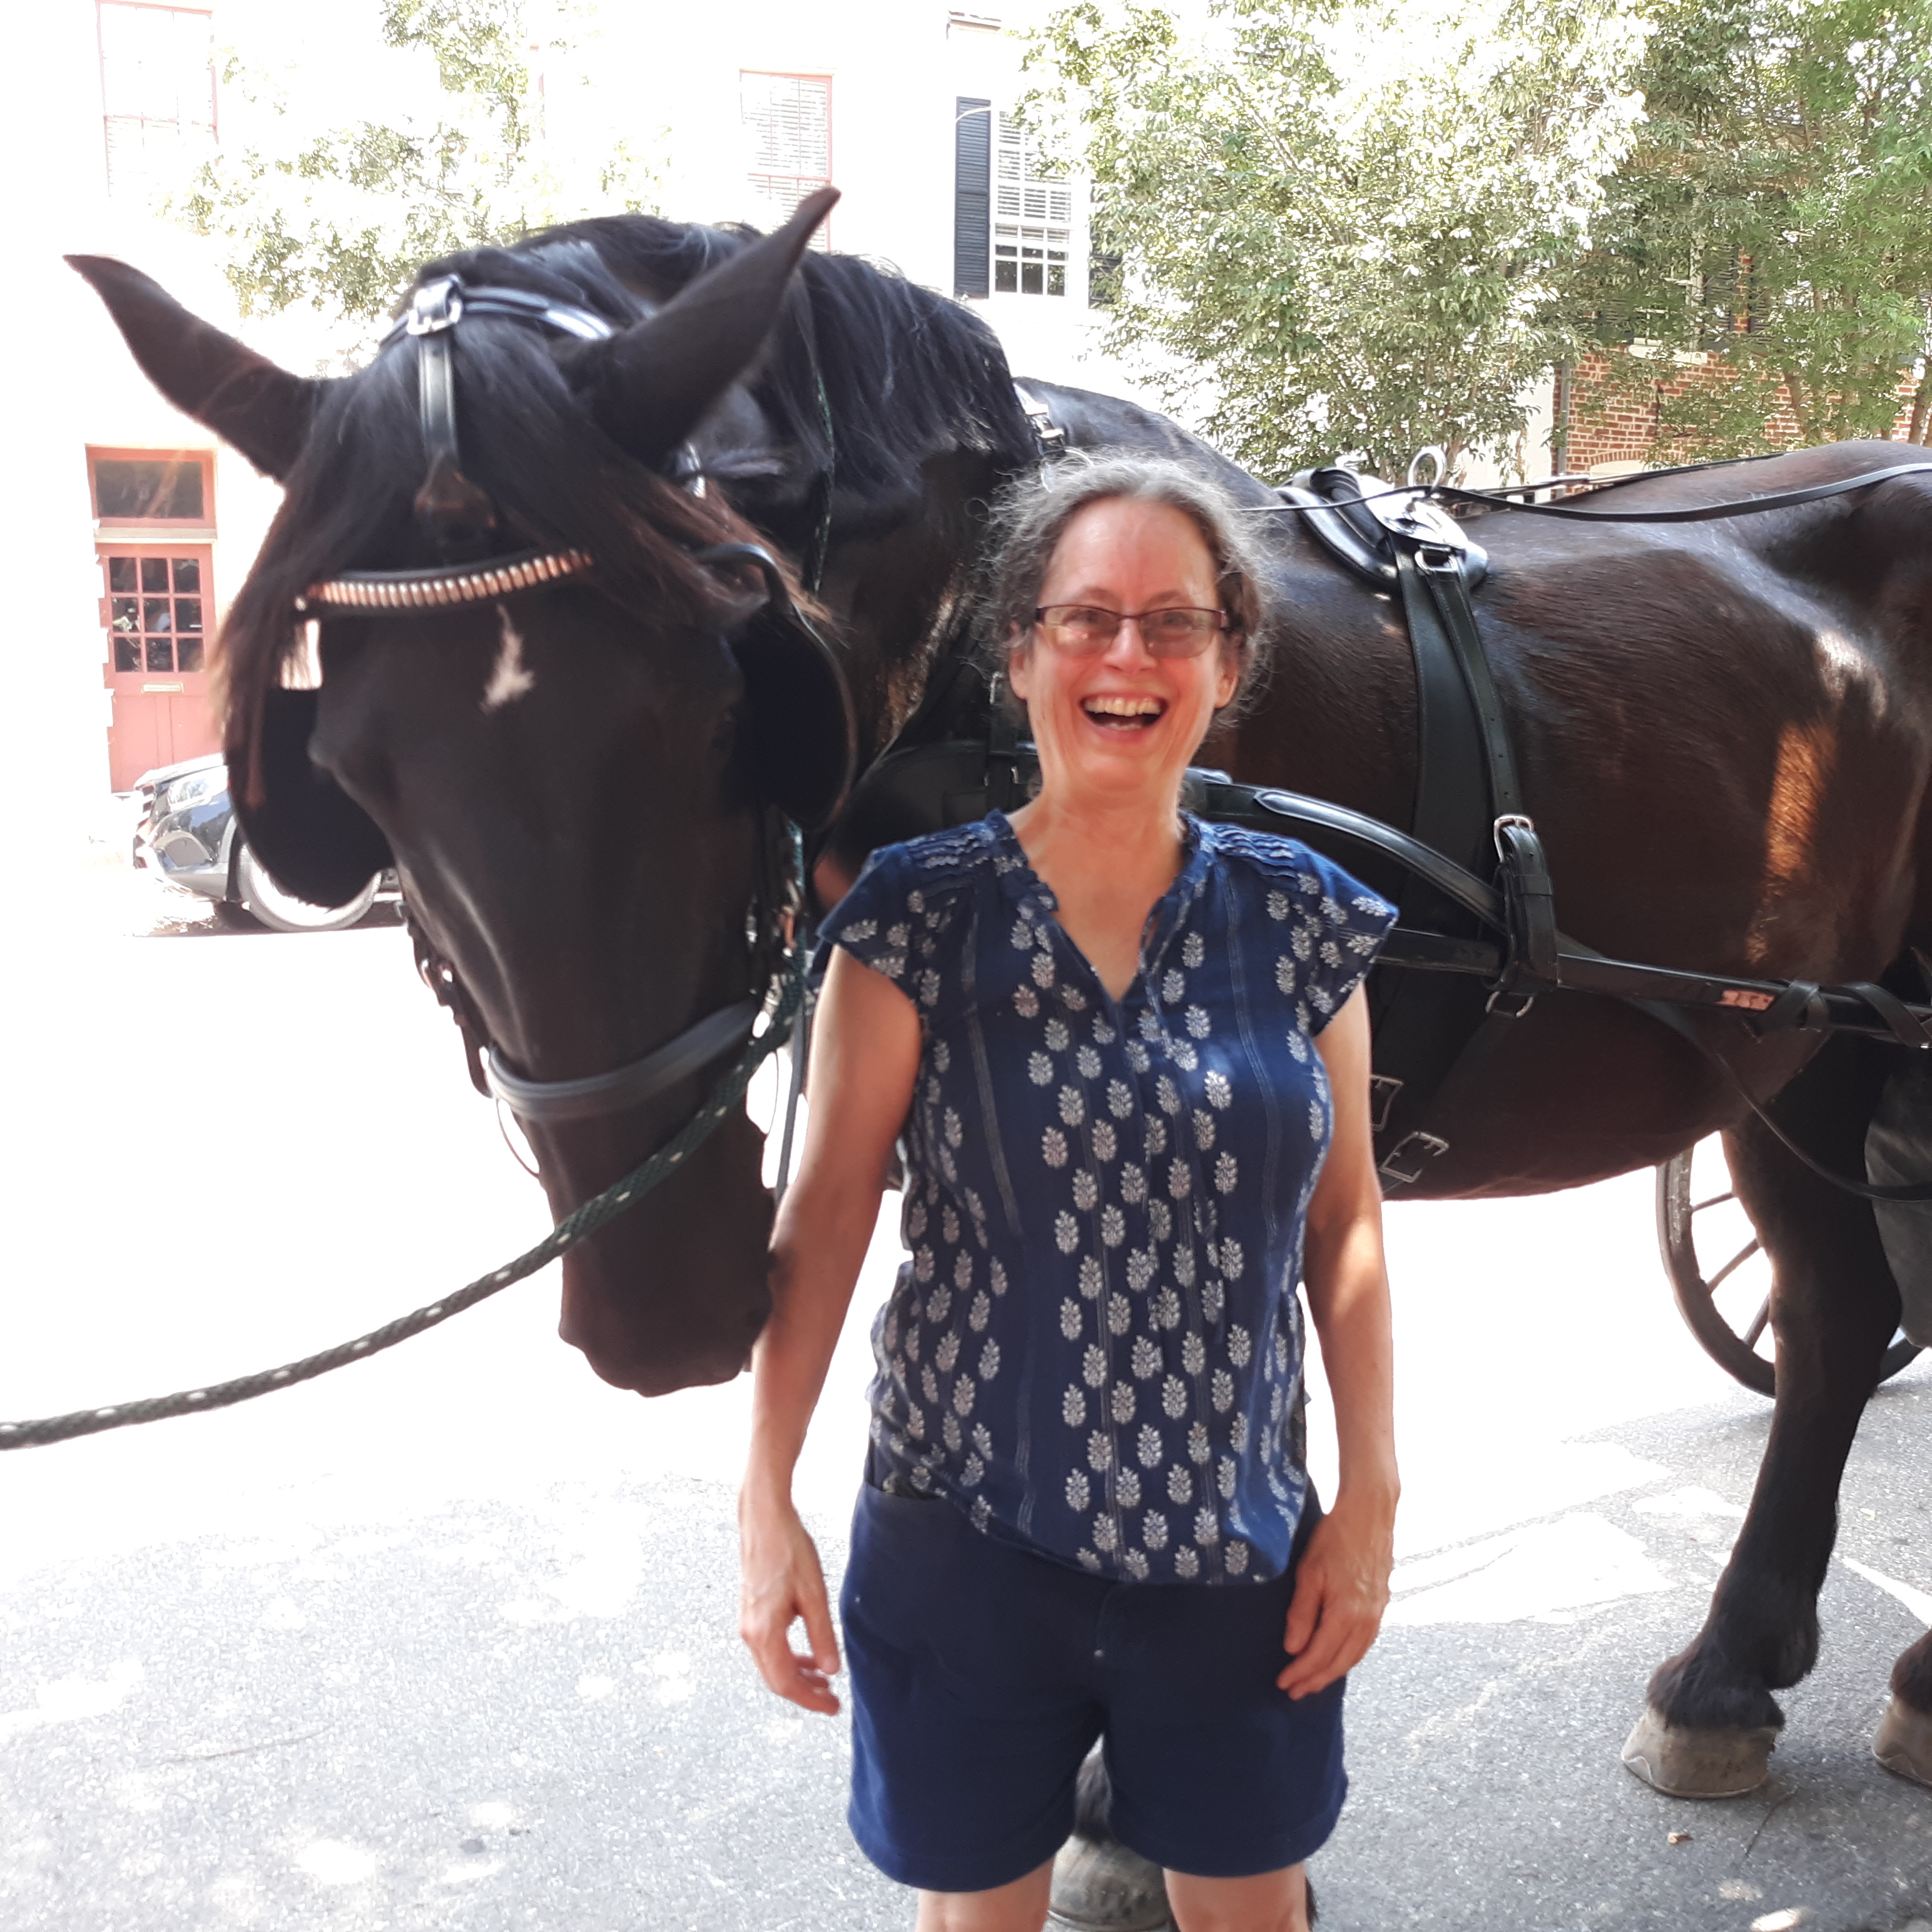 Linda Adams standing in front of Raven, a former plow horse